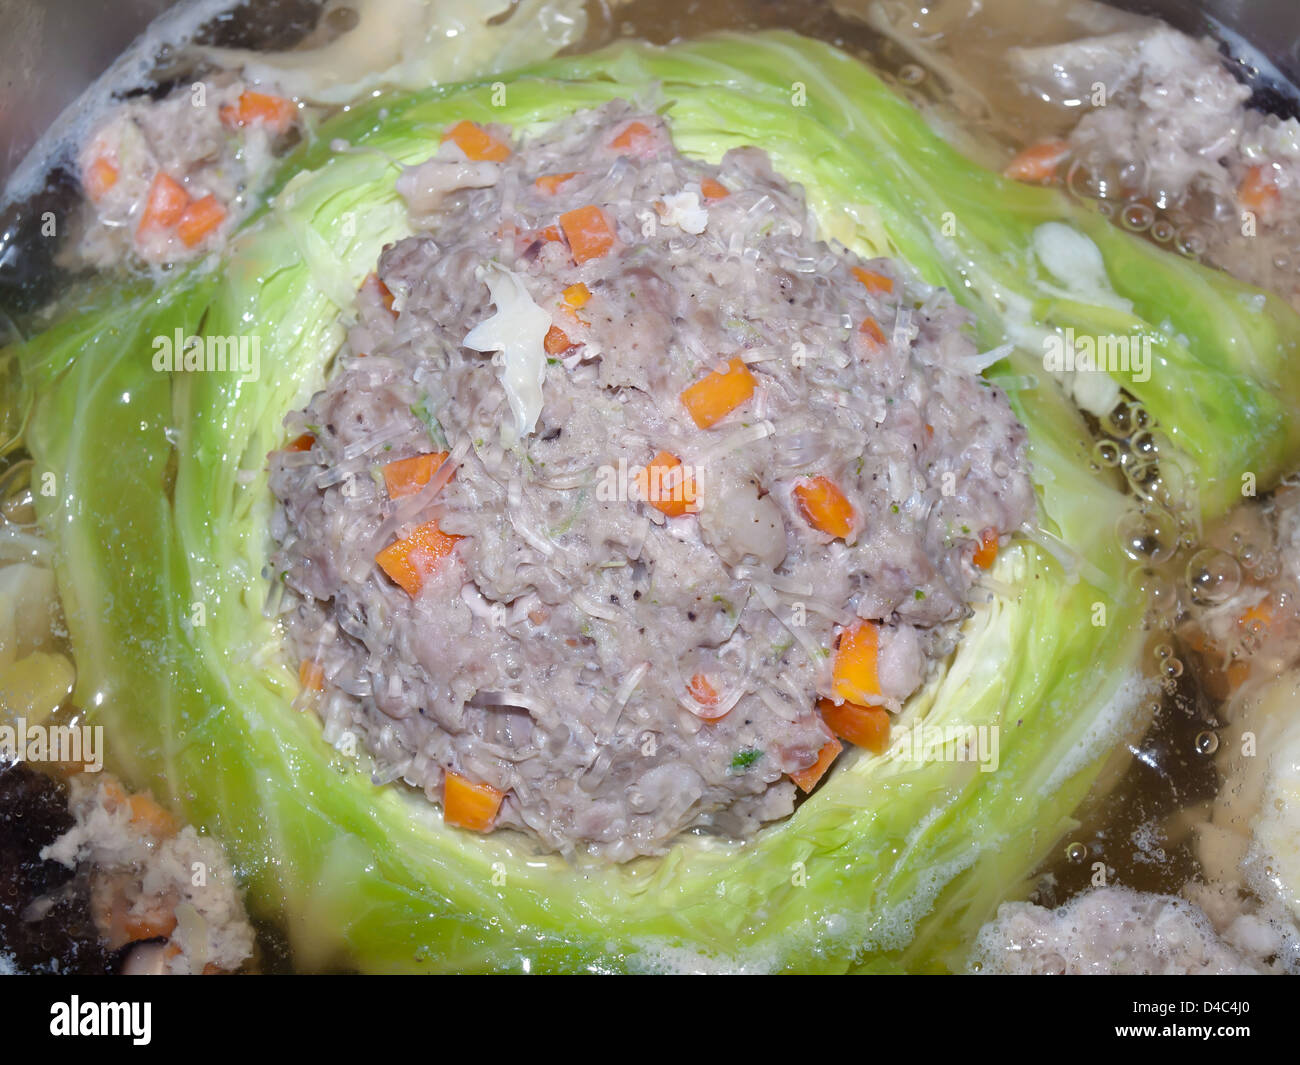 Minced pork mixed with flavouring stuffed in cabbage Stock Photo